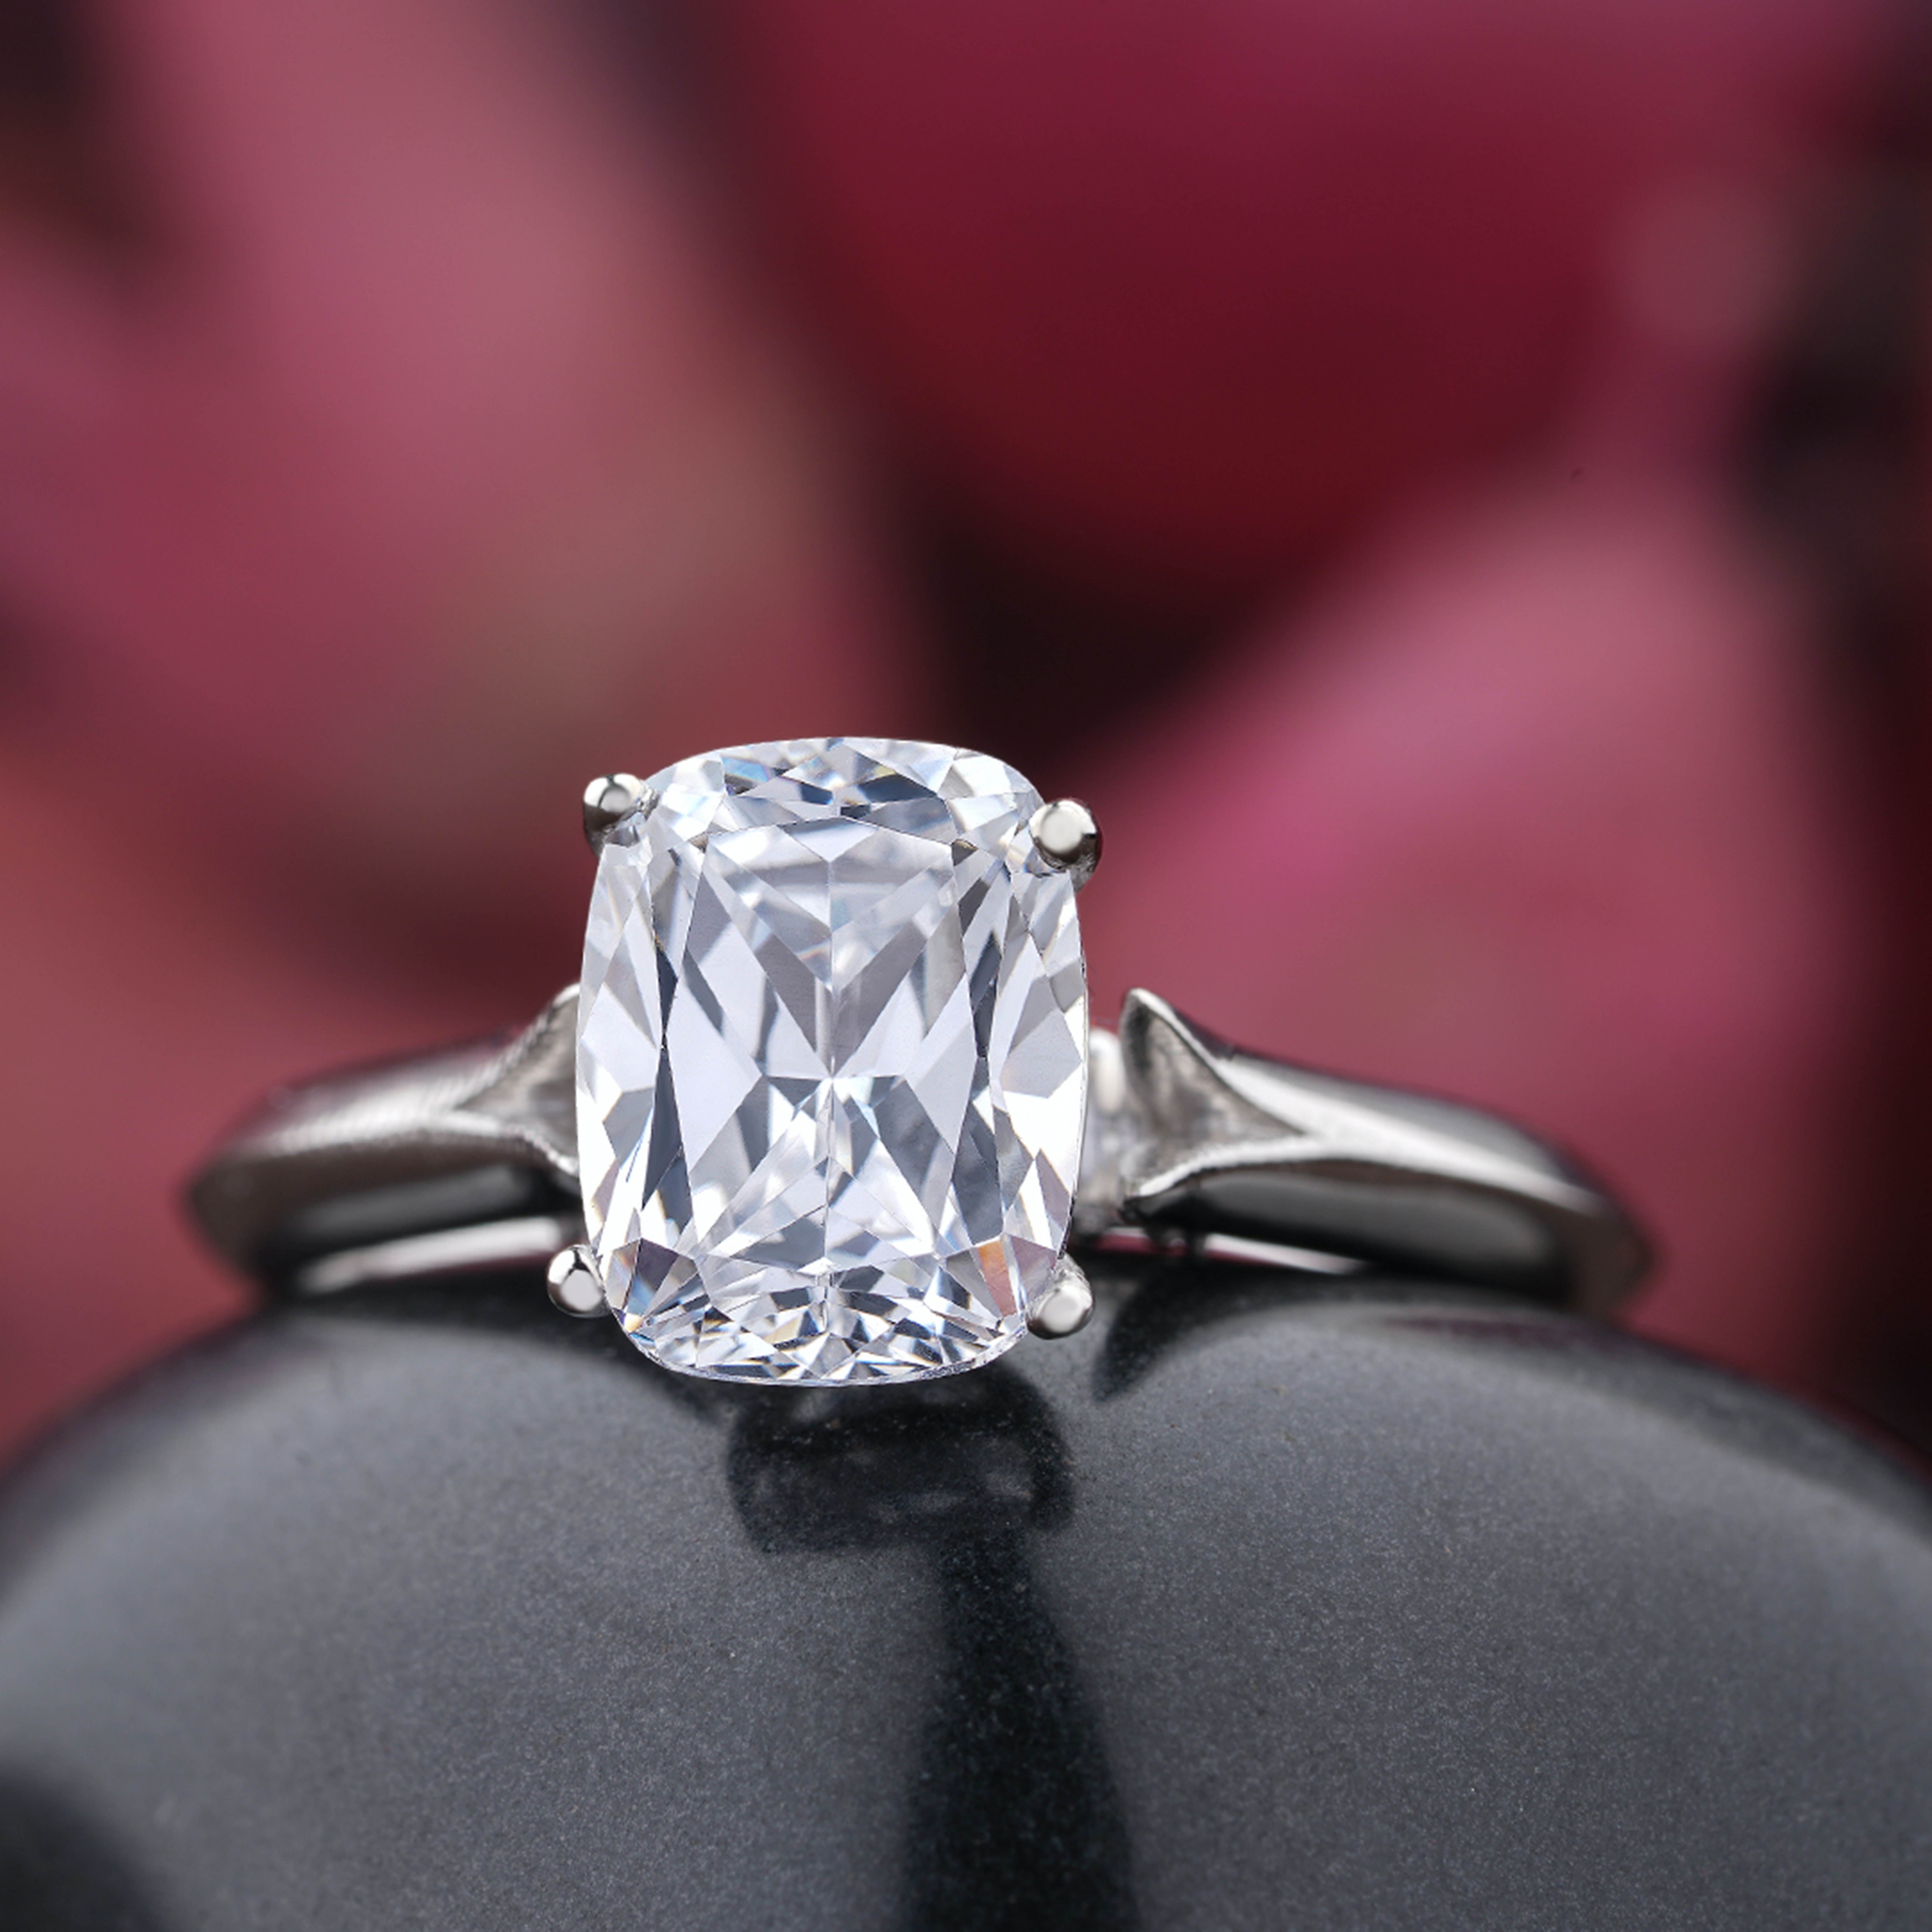 Essential Factors to Consider When Buying an Engagement Ring